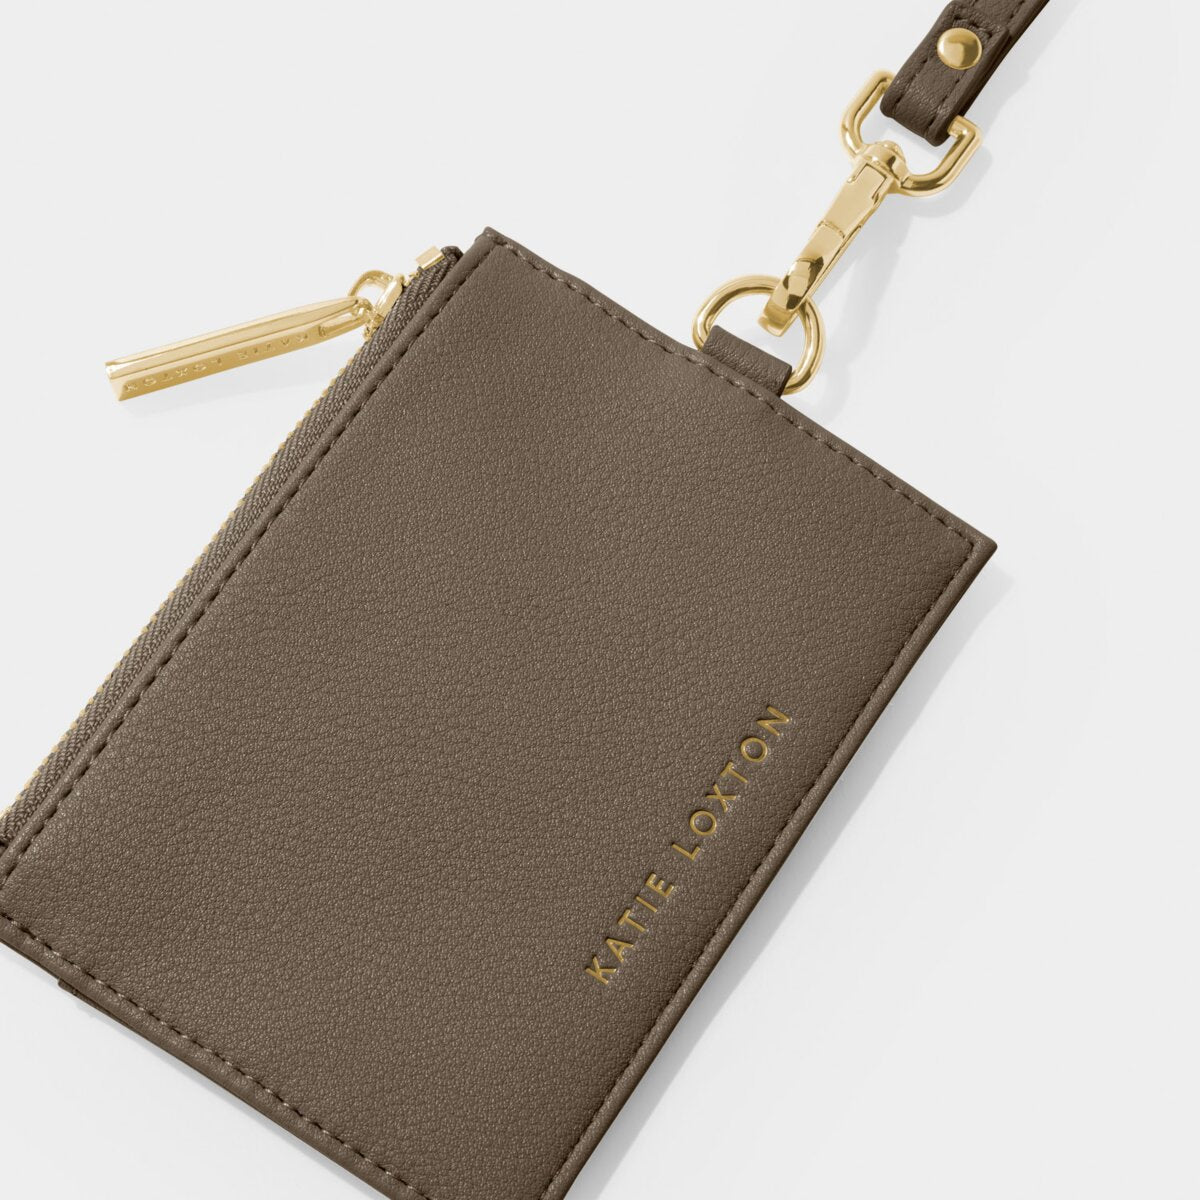 Ashley Cardholder with Strap in Mink color. Available at Kadou Boutique.